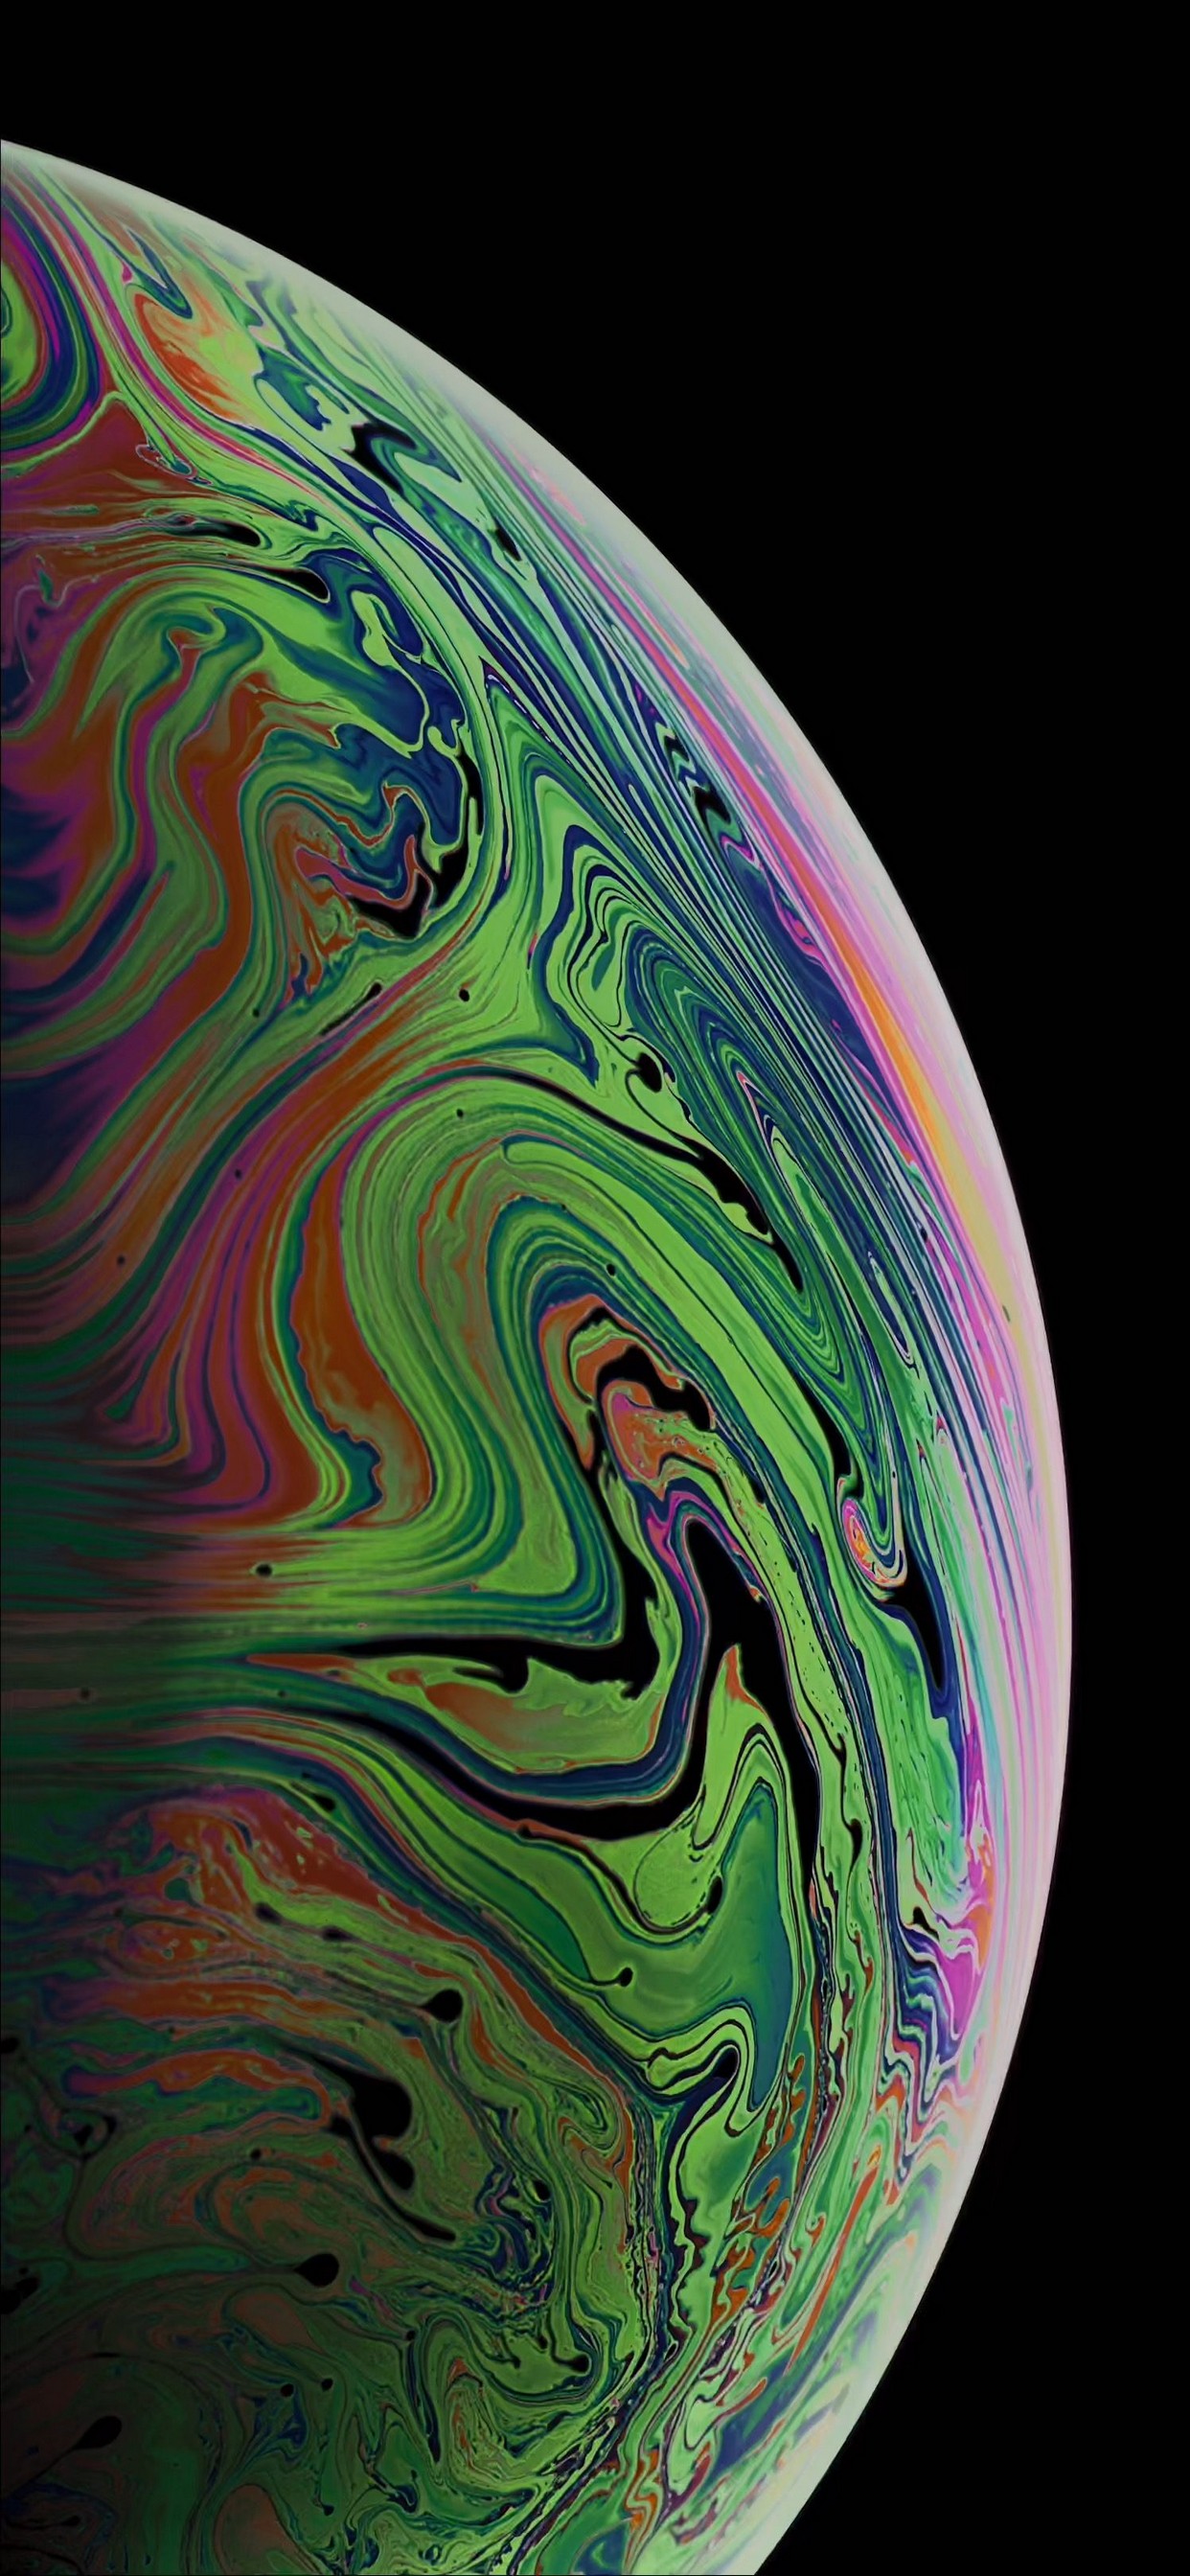 iPhone XS Max Backgrounds With high-resolution 1242X2688 pixel. You can set as wallpaper for Apple iPhone X, XS Max, XR, 8, 7, 6, SE, iPad. Enjoy and share your favorite HD wallpapers and background images